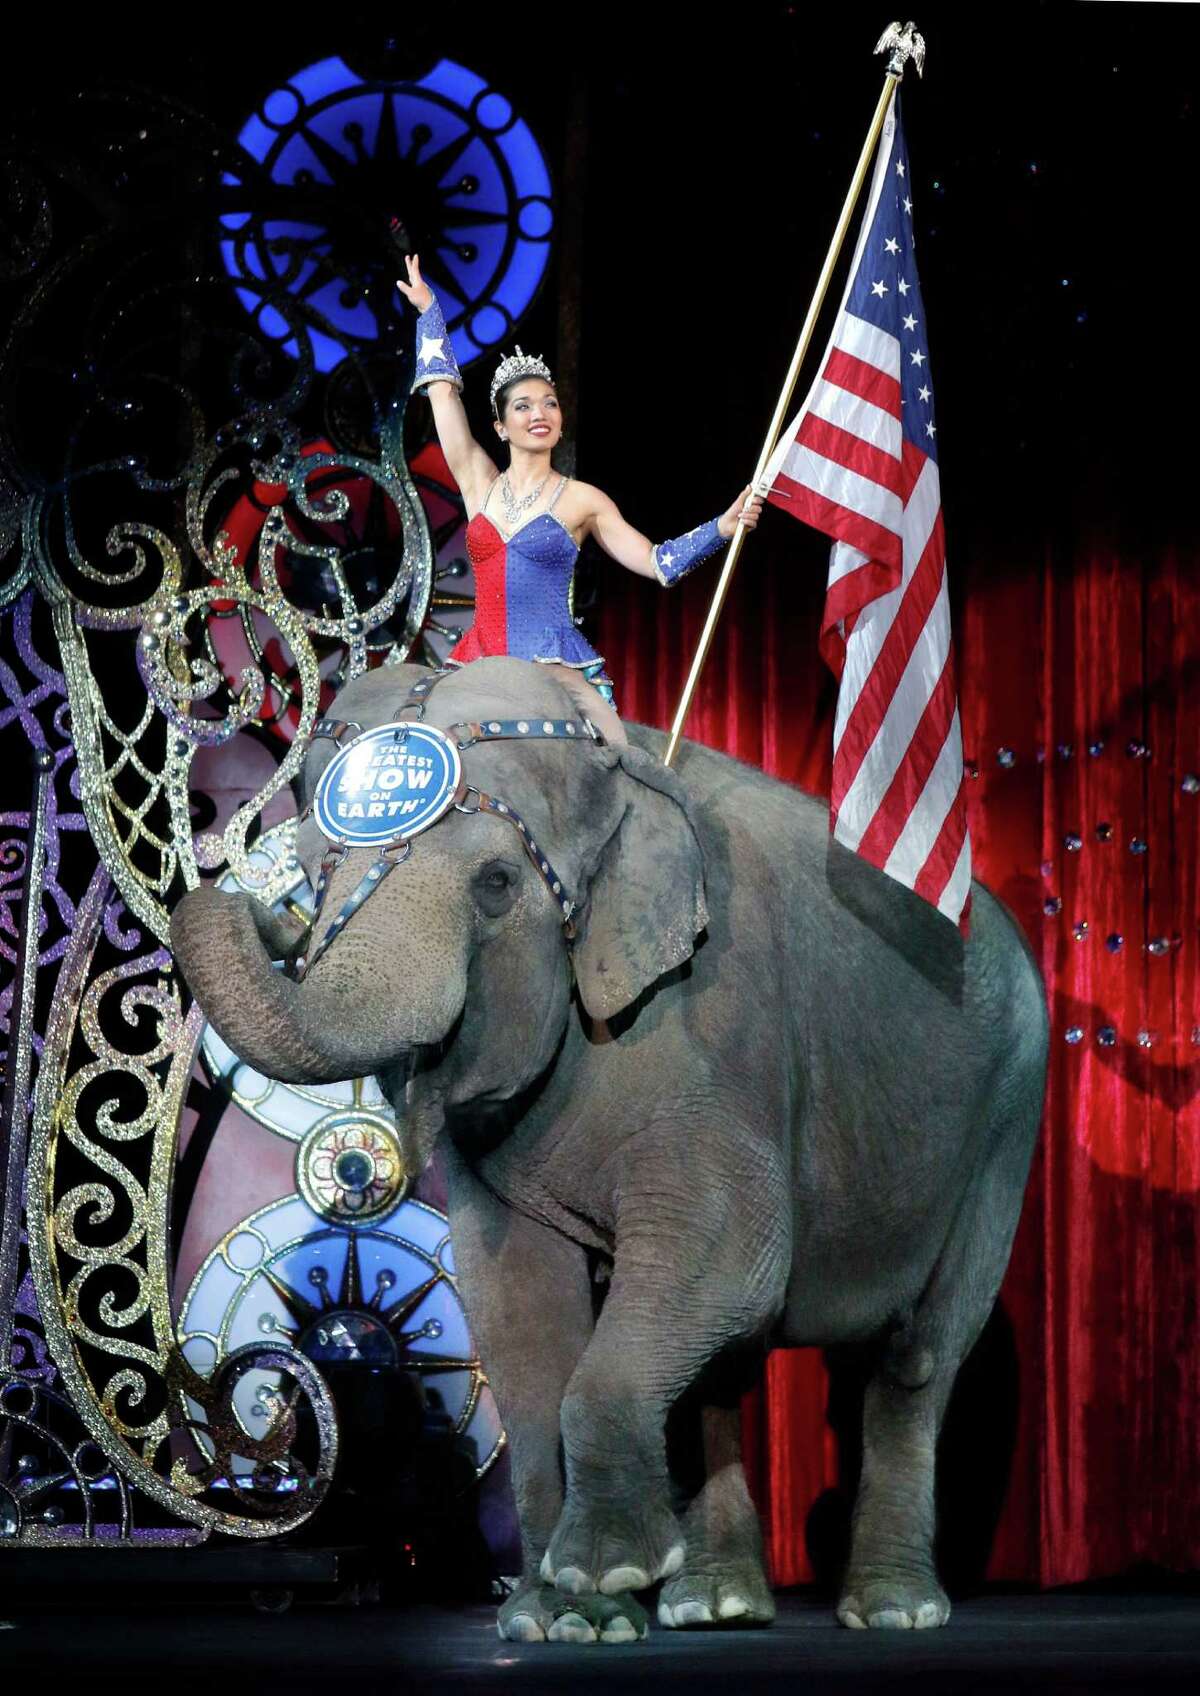 An Asian elephant performs during the national anthem for the final time in the Ringling Bros. and Barnum & Bailey Circus Sunday, May 1, 2016, in Providence, R.I. the The circus closes its own chapter on a controversial practice that has entertained audiences since circuses began in America two centuries ago. The animals will live at the Ringling Bros. 200-acre Center for Elephant Conservation in Florida. (AP Photo/Bill Sikes)